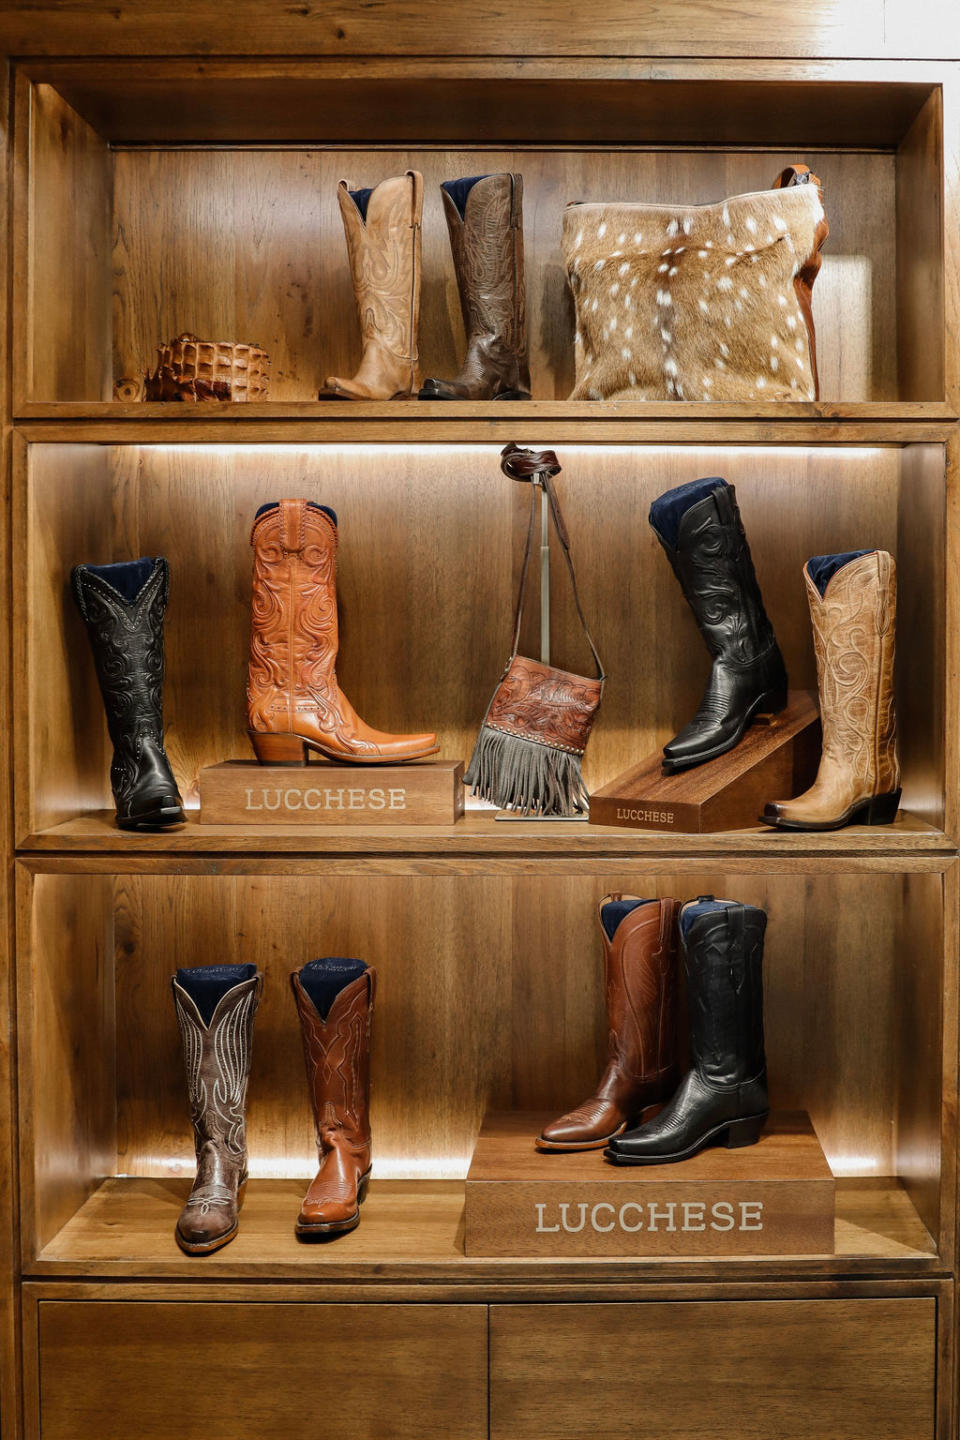 Inside Lucchese’s new Baybrook Mall store. - Credit: Courtesy of Lucchese